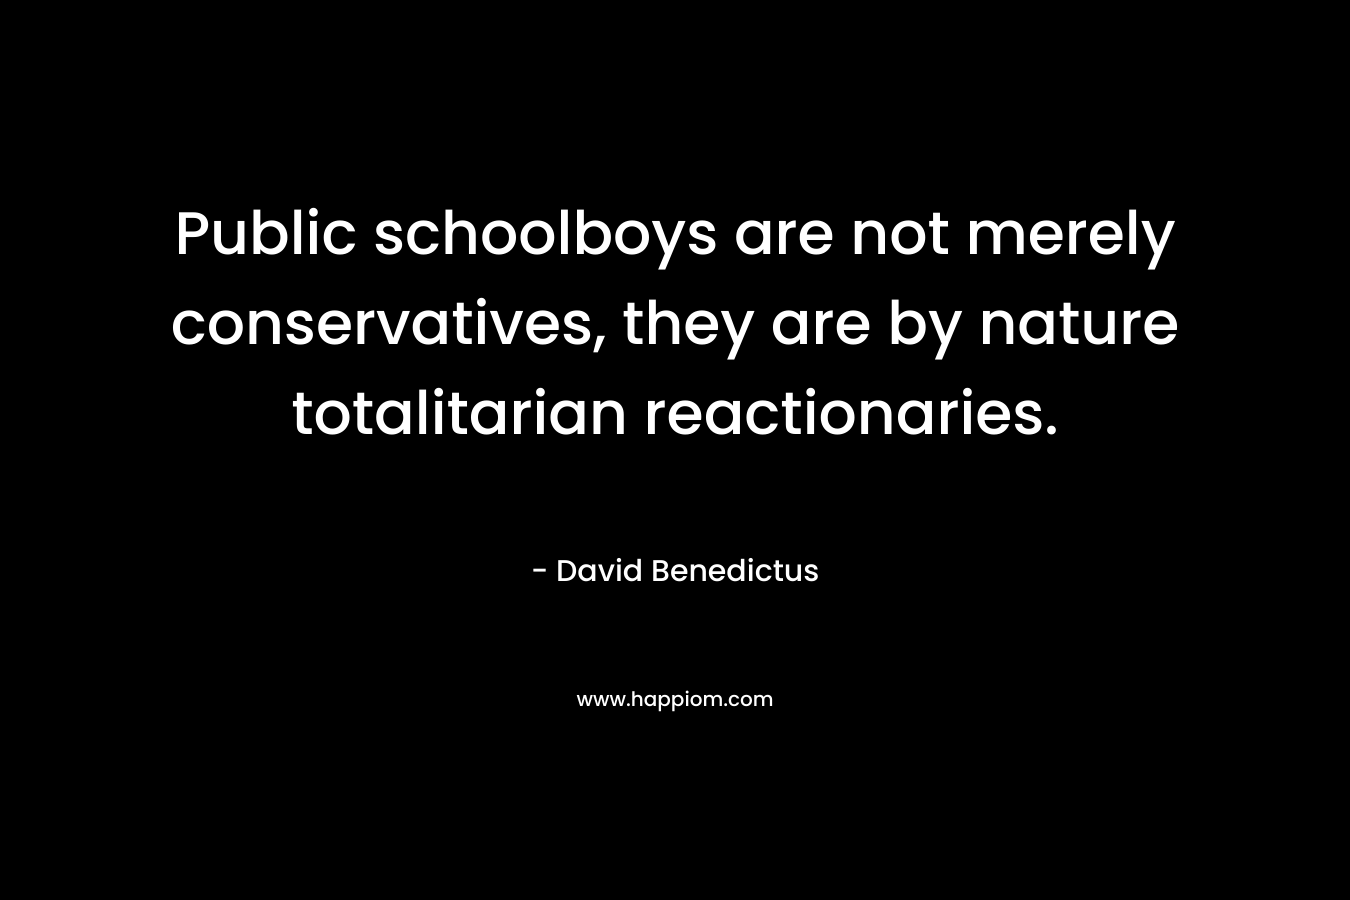 Public schoolboys are not merely conservatives, they are by nature totalitarian reactionaries. – David Benedictus